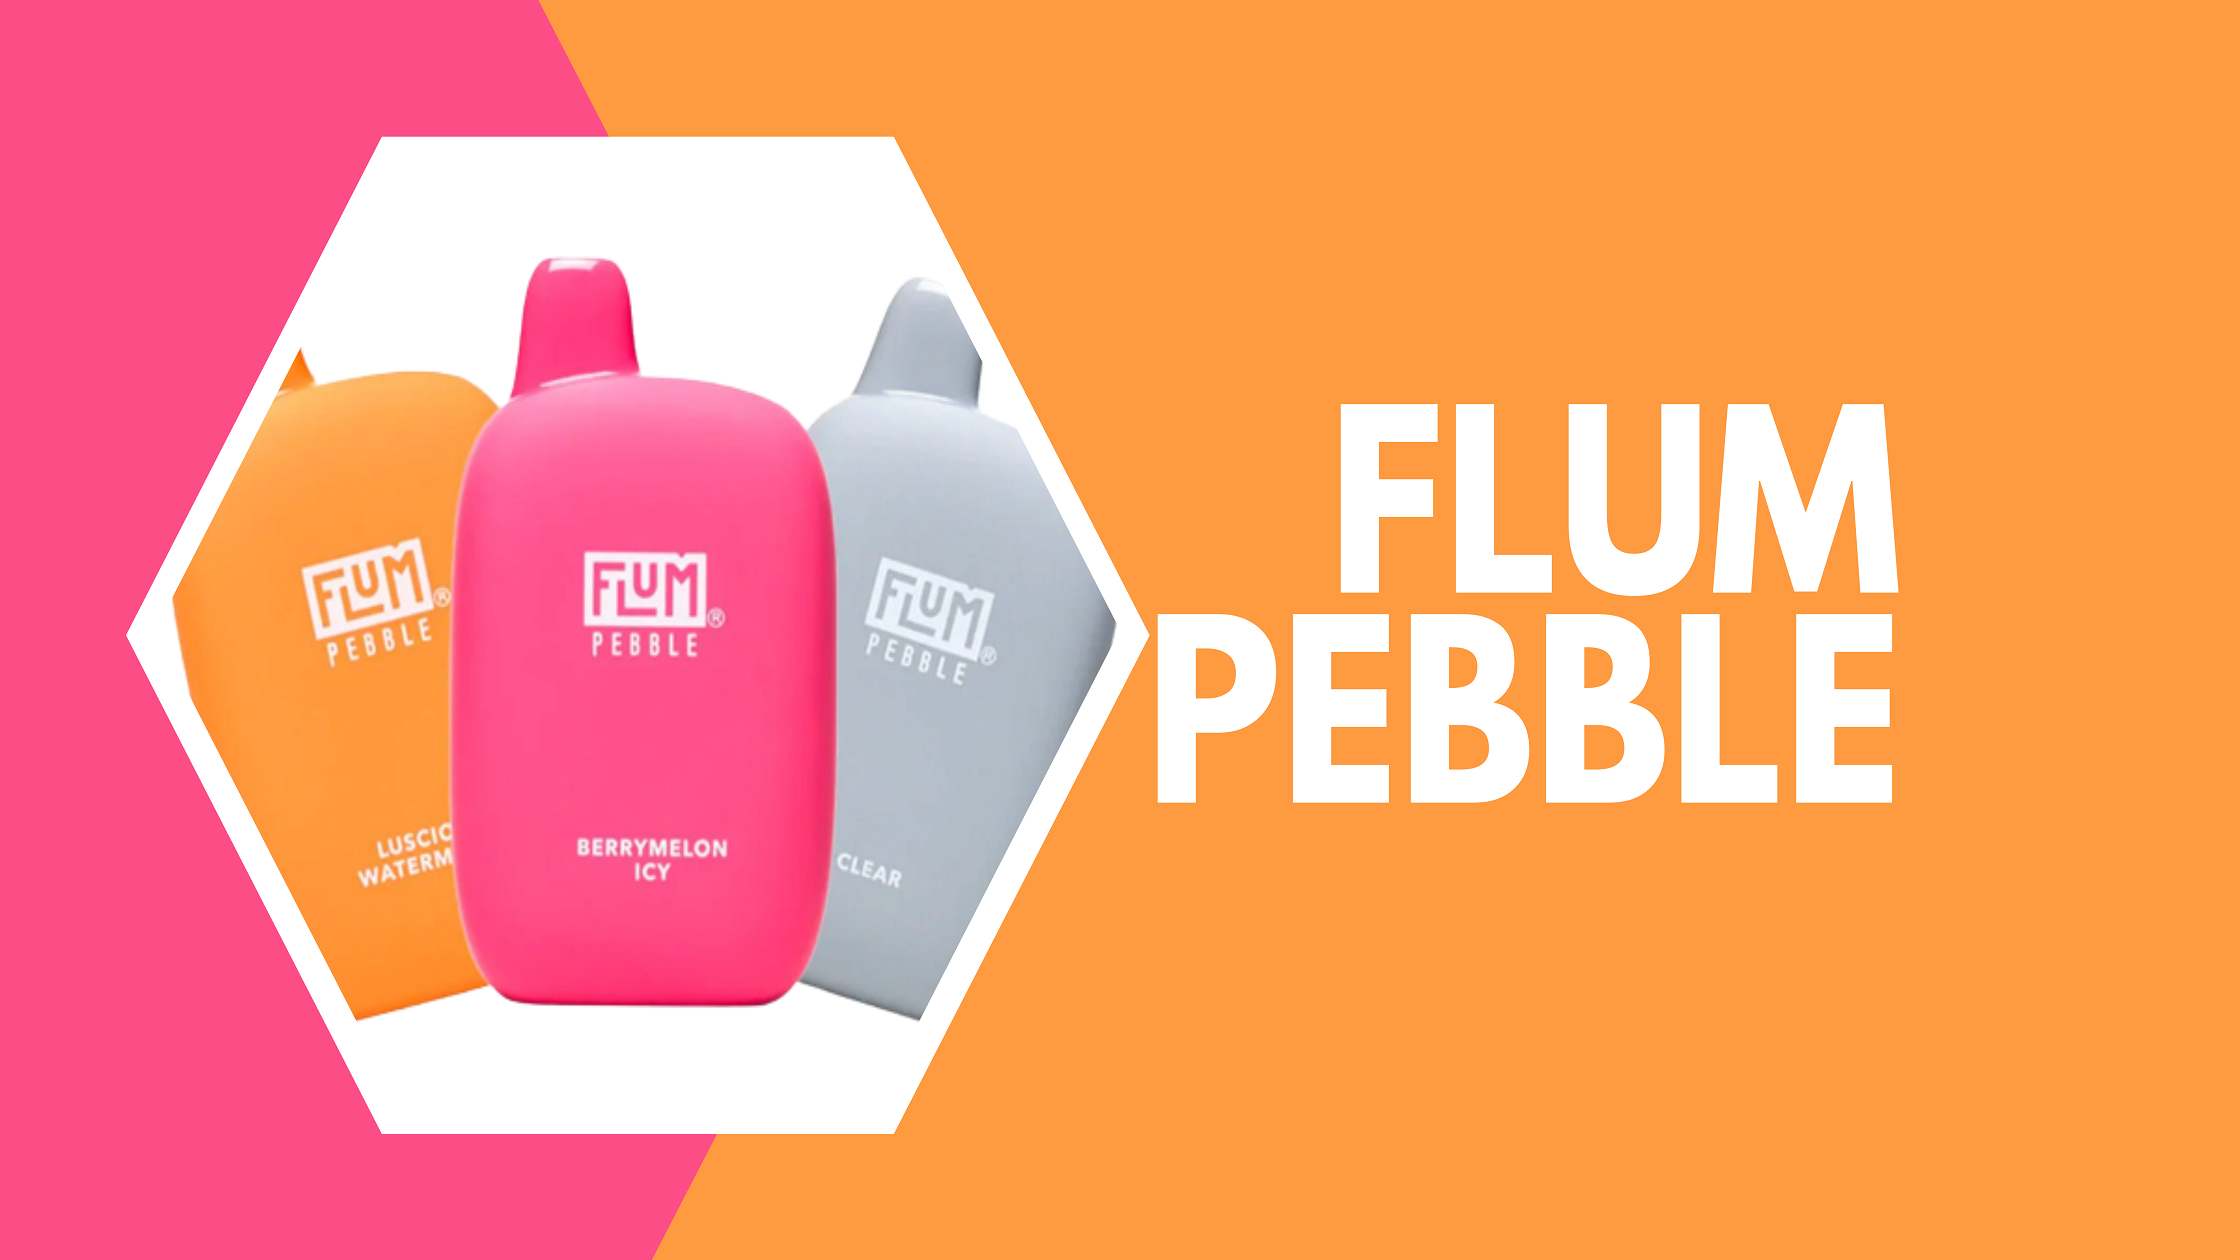 These Excellent 12 Features Will Justify the Craze for Flum Pebble